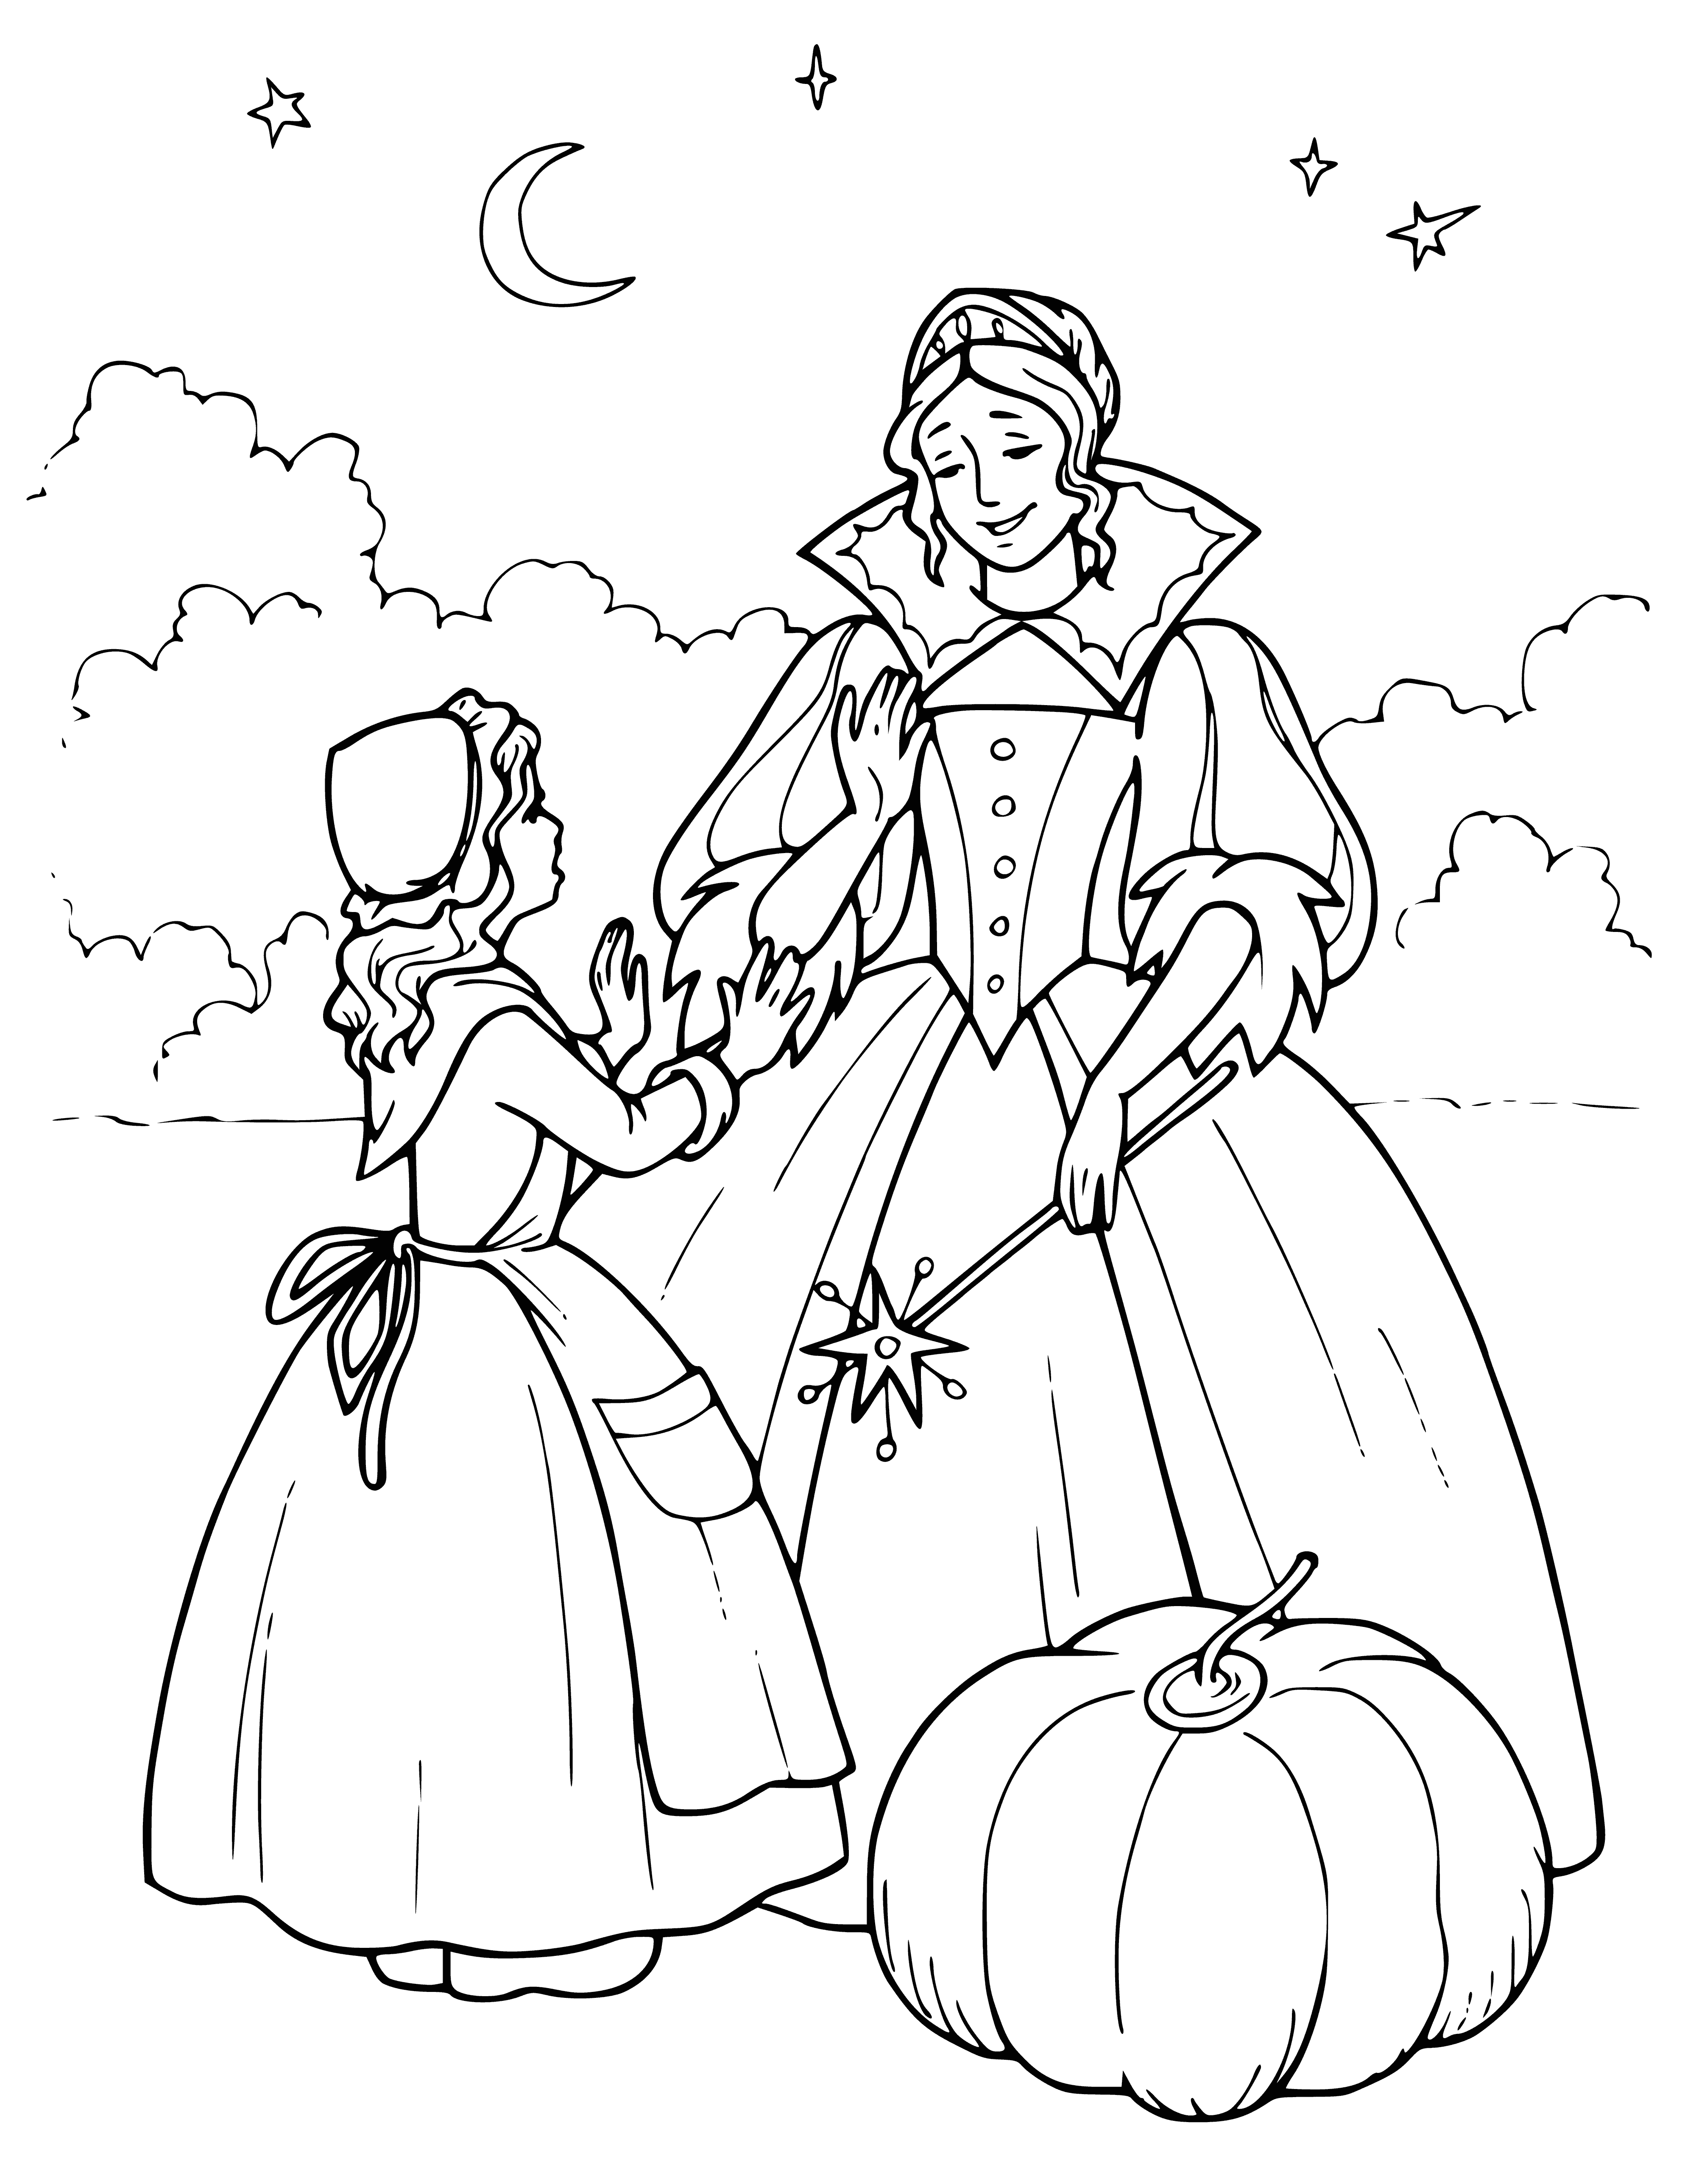 coloring page: Woman in blue dress w/ white collar & apron standing in front of fireplace, holding broom & petting black cat.